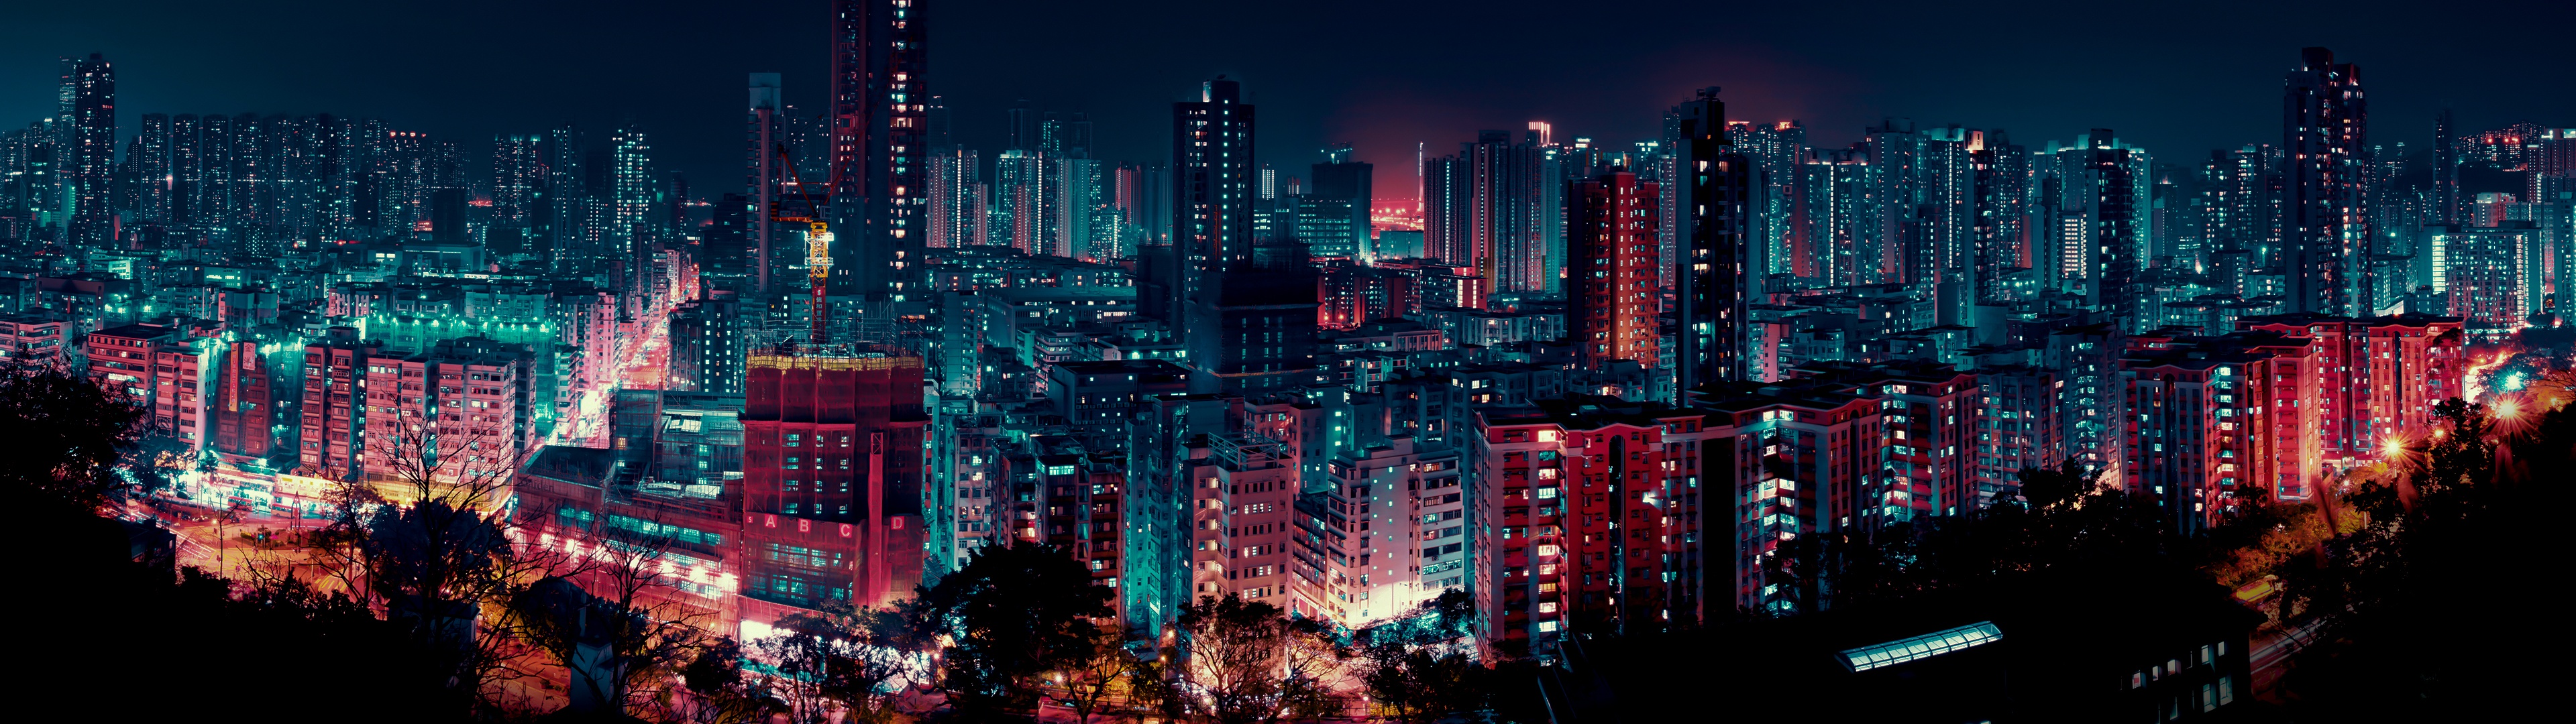 A city at night with many tall buildings - City